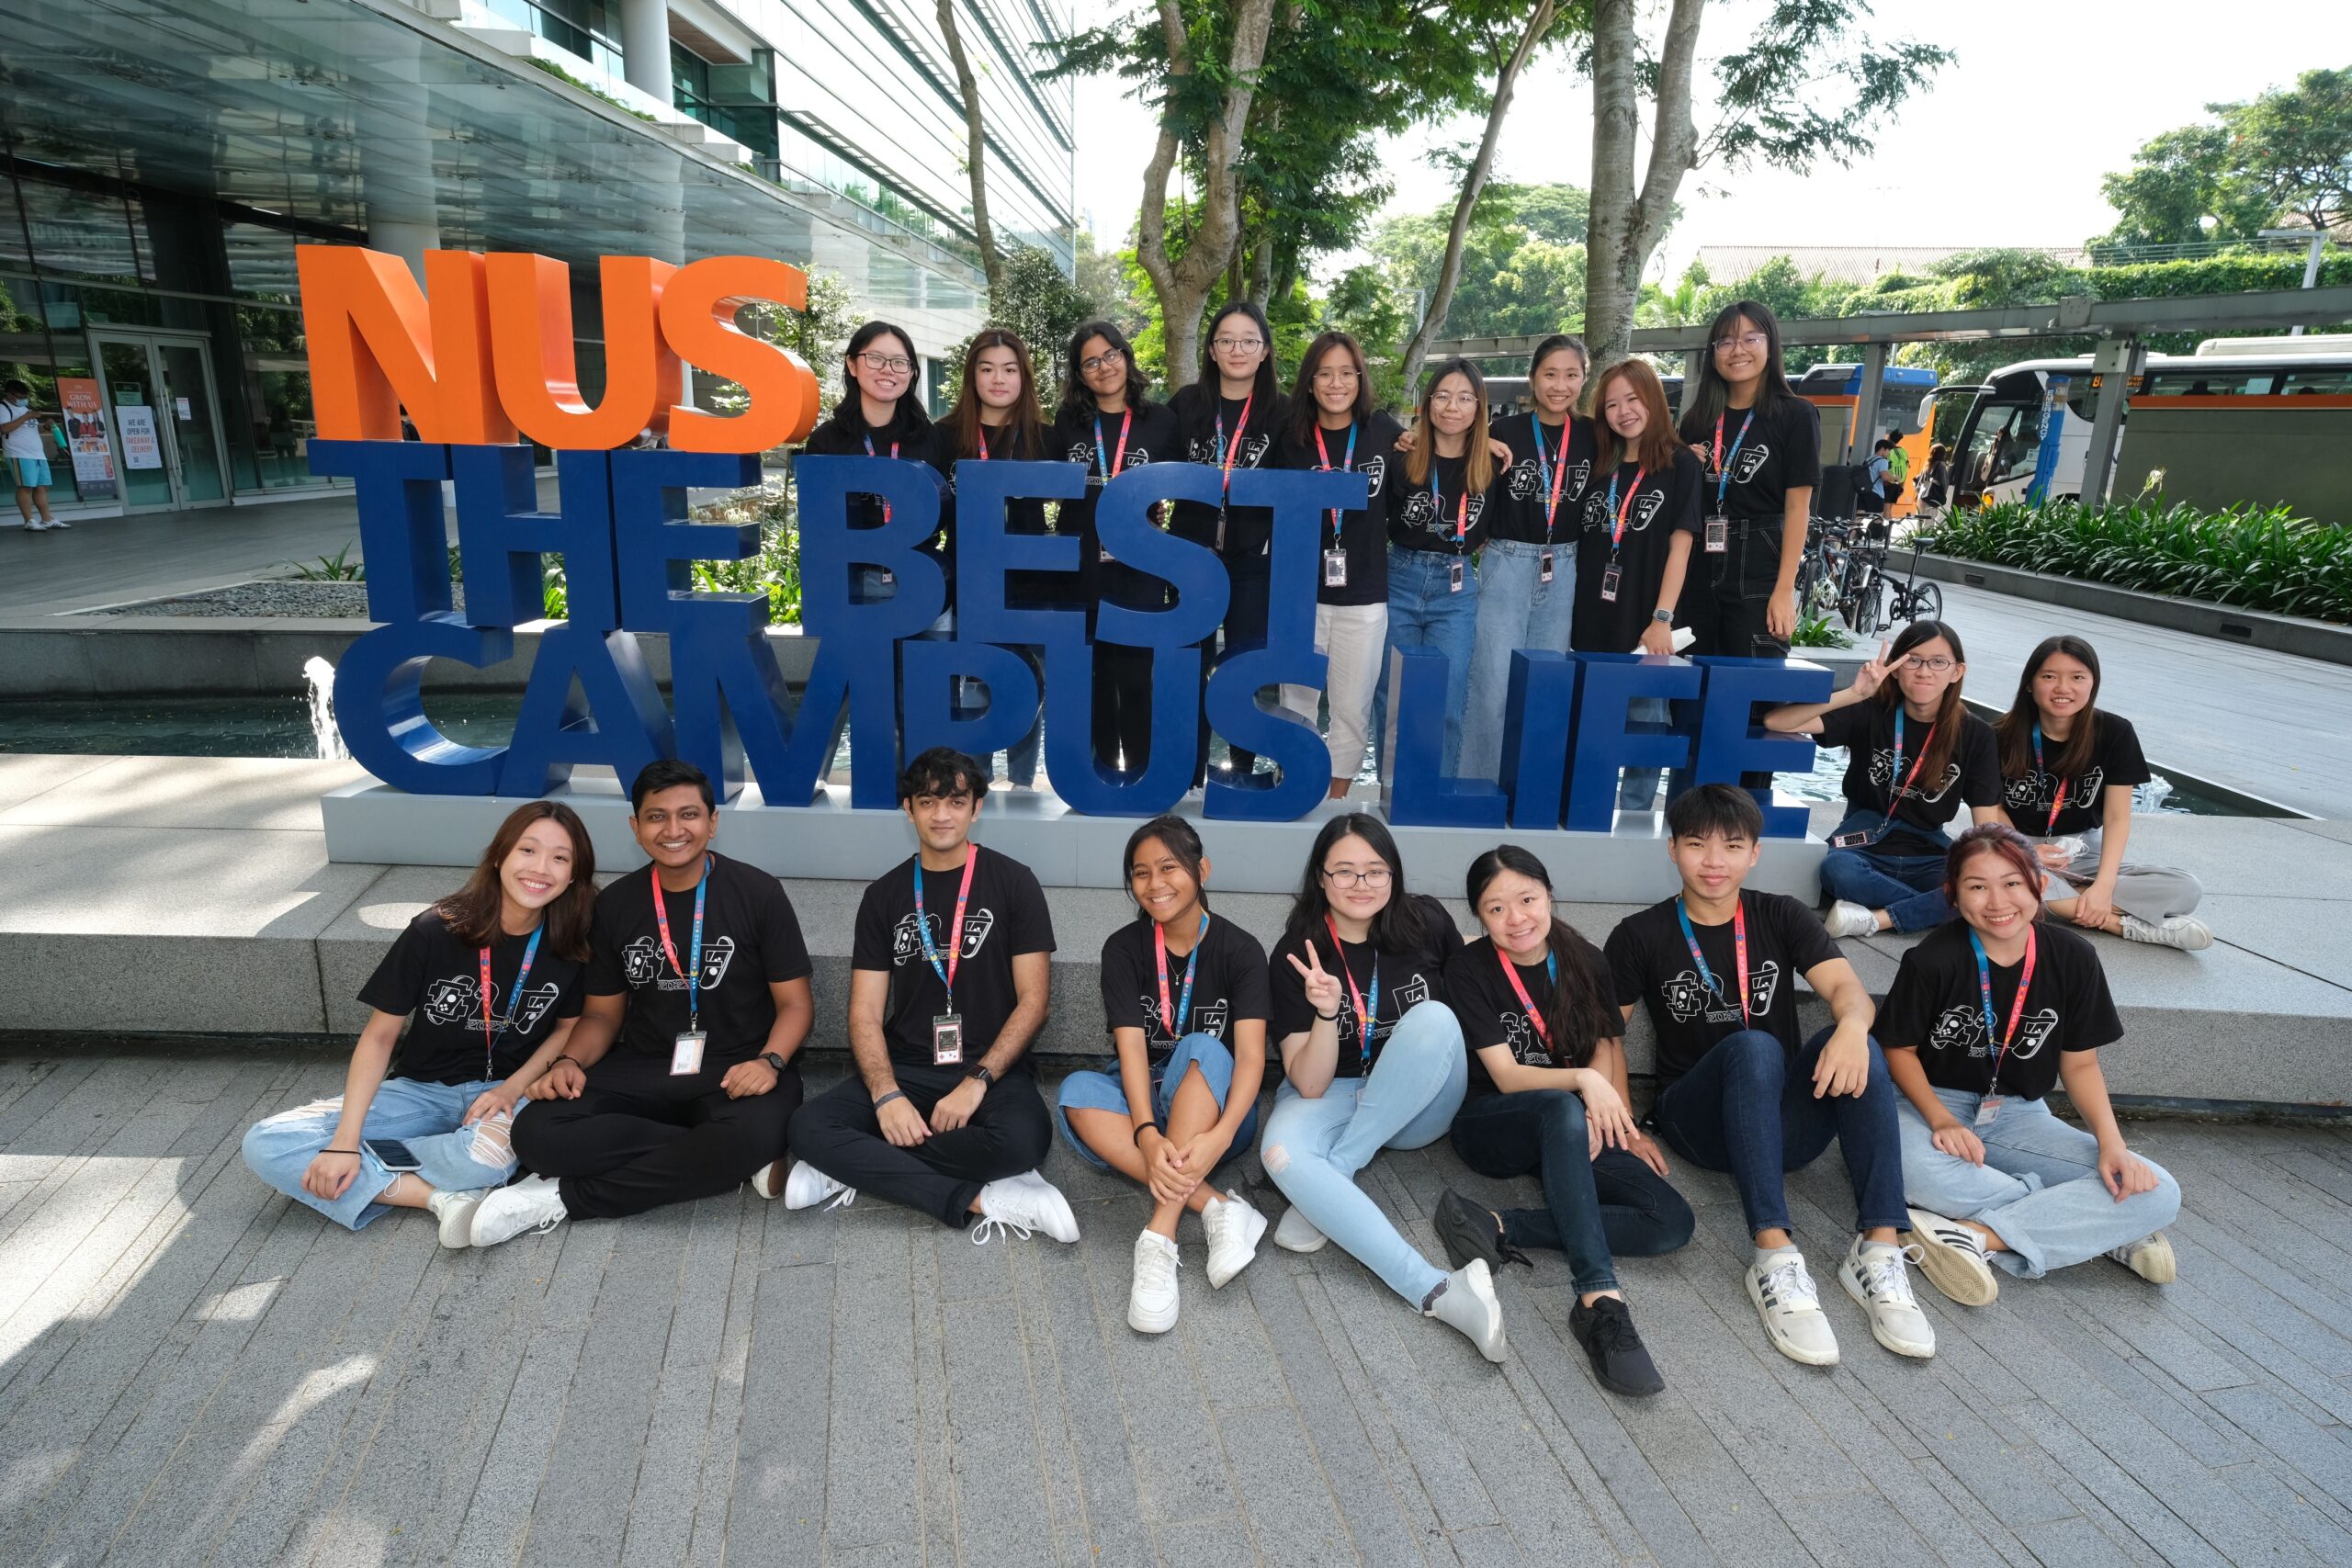 Heather Pang, back row, second to the left poses with her NUSSU SLF 2022 Organising Committee. 

